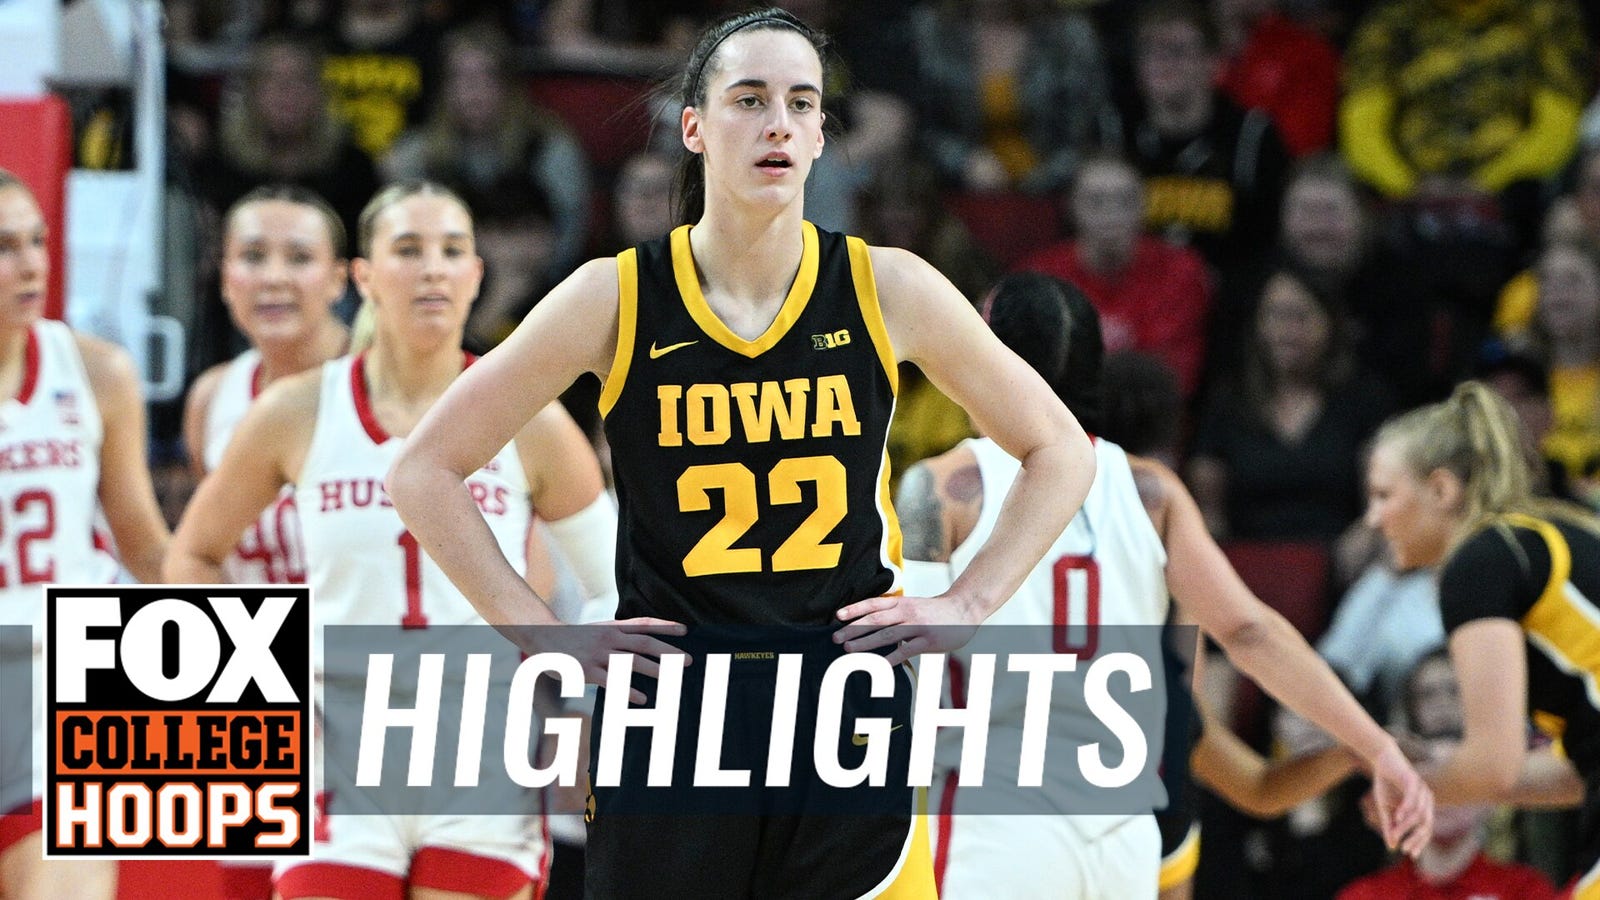 Iowa's Caitlin Clark tallies 31 points and 10 assists in loss